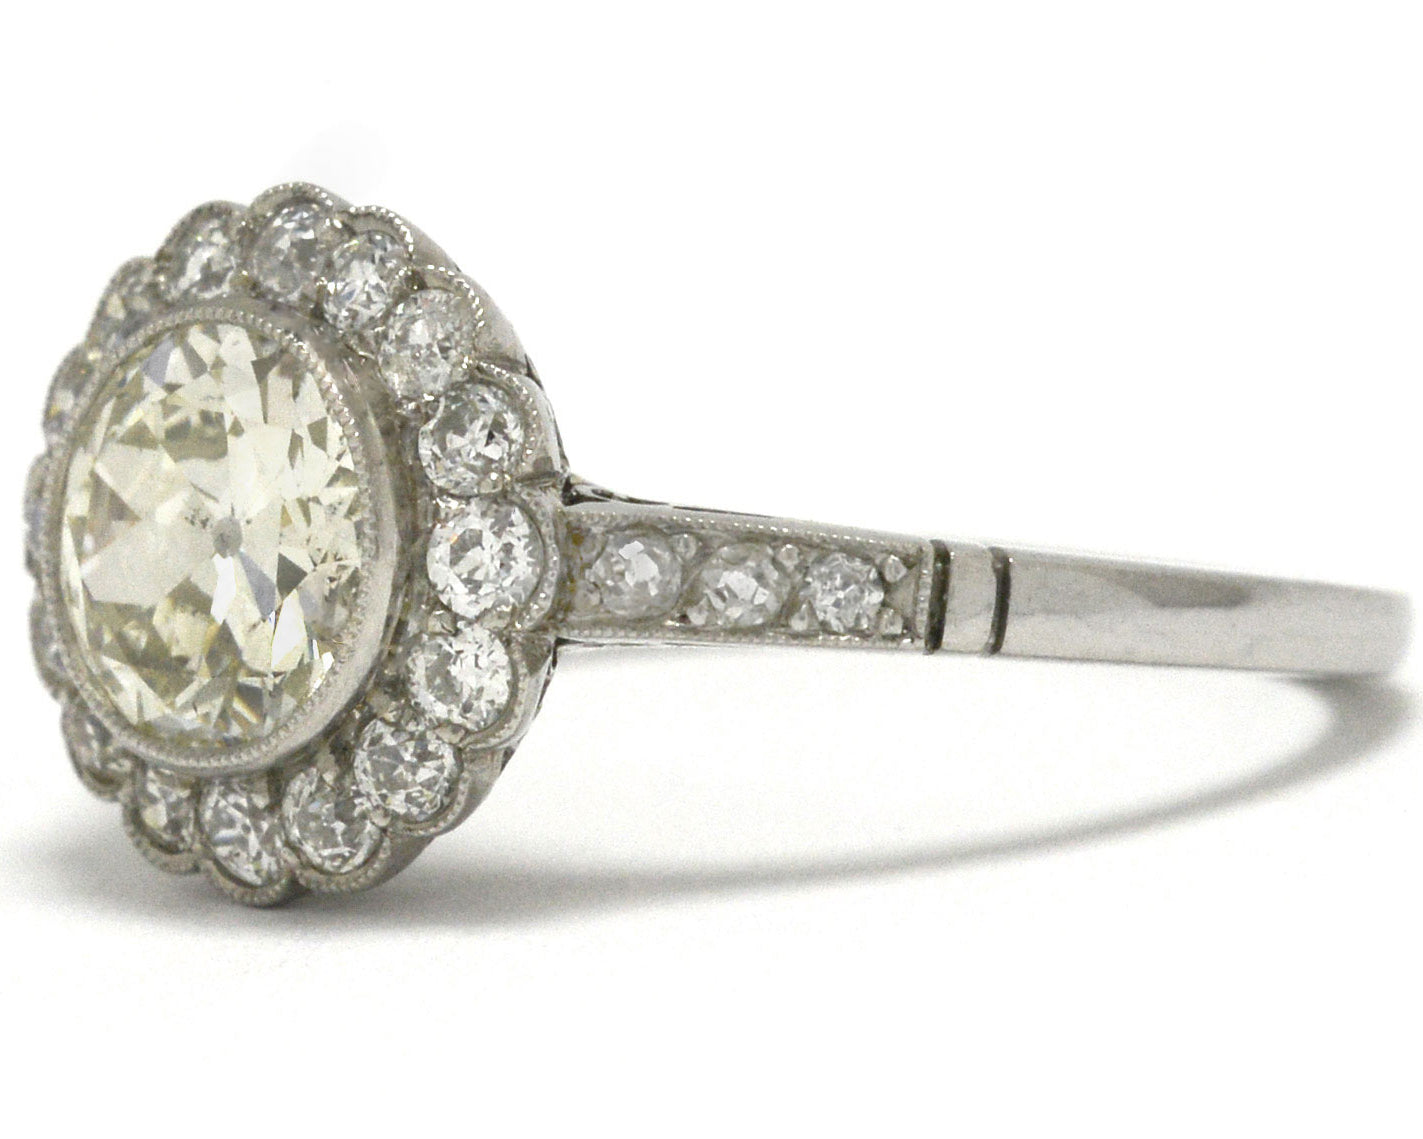 An over 1 carat old European diamond floral halo ring.